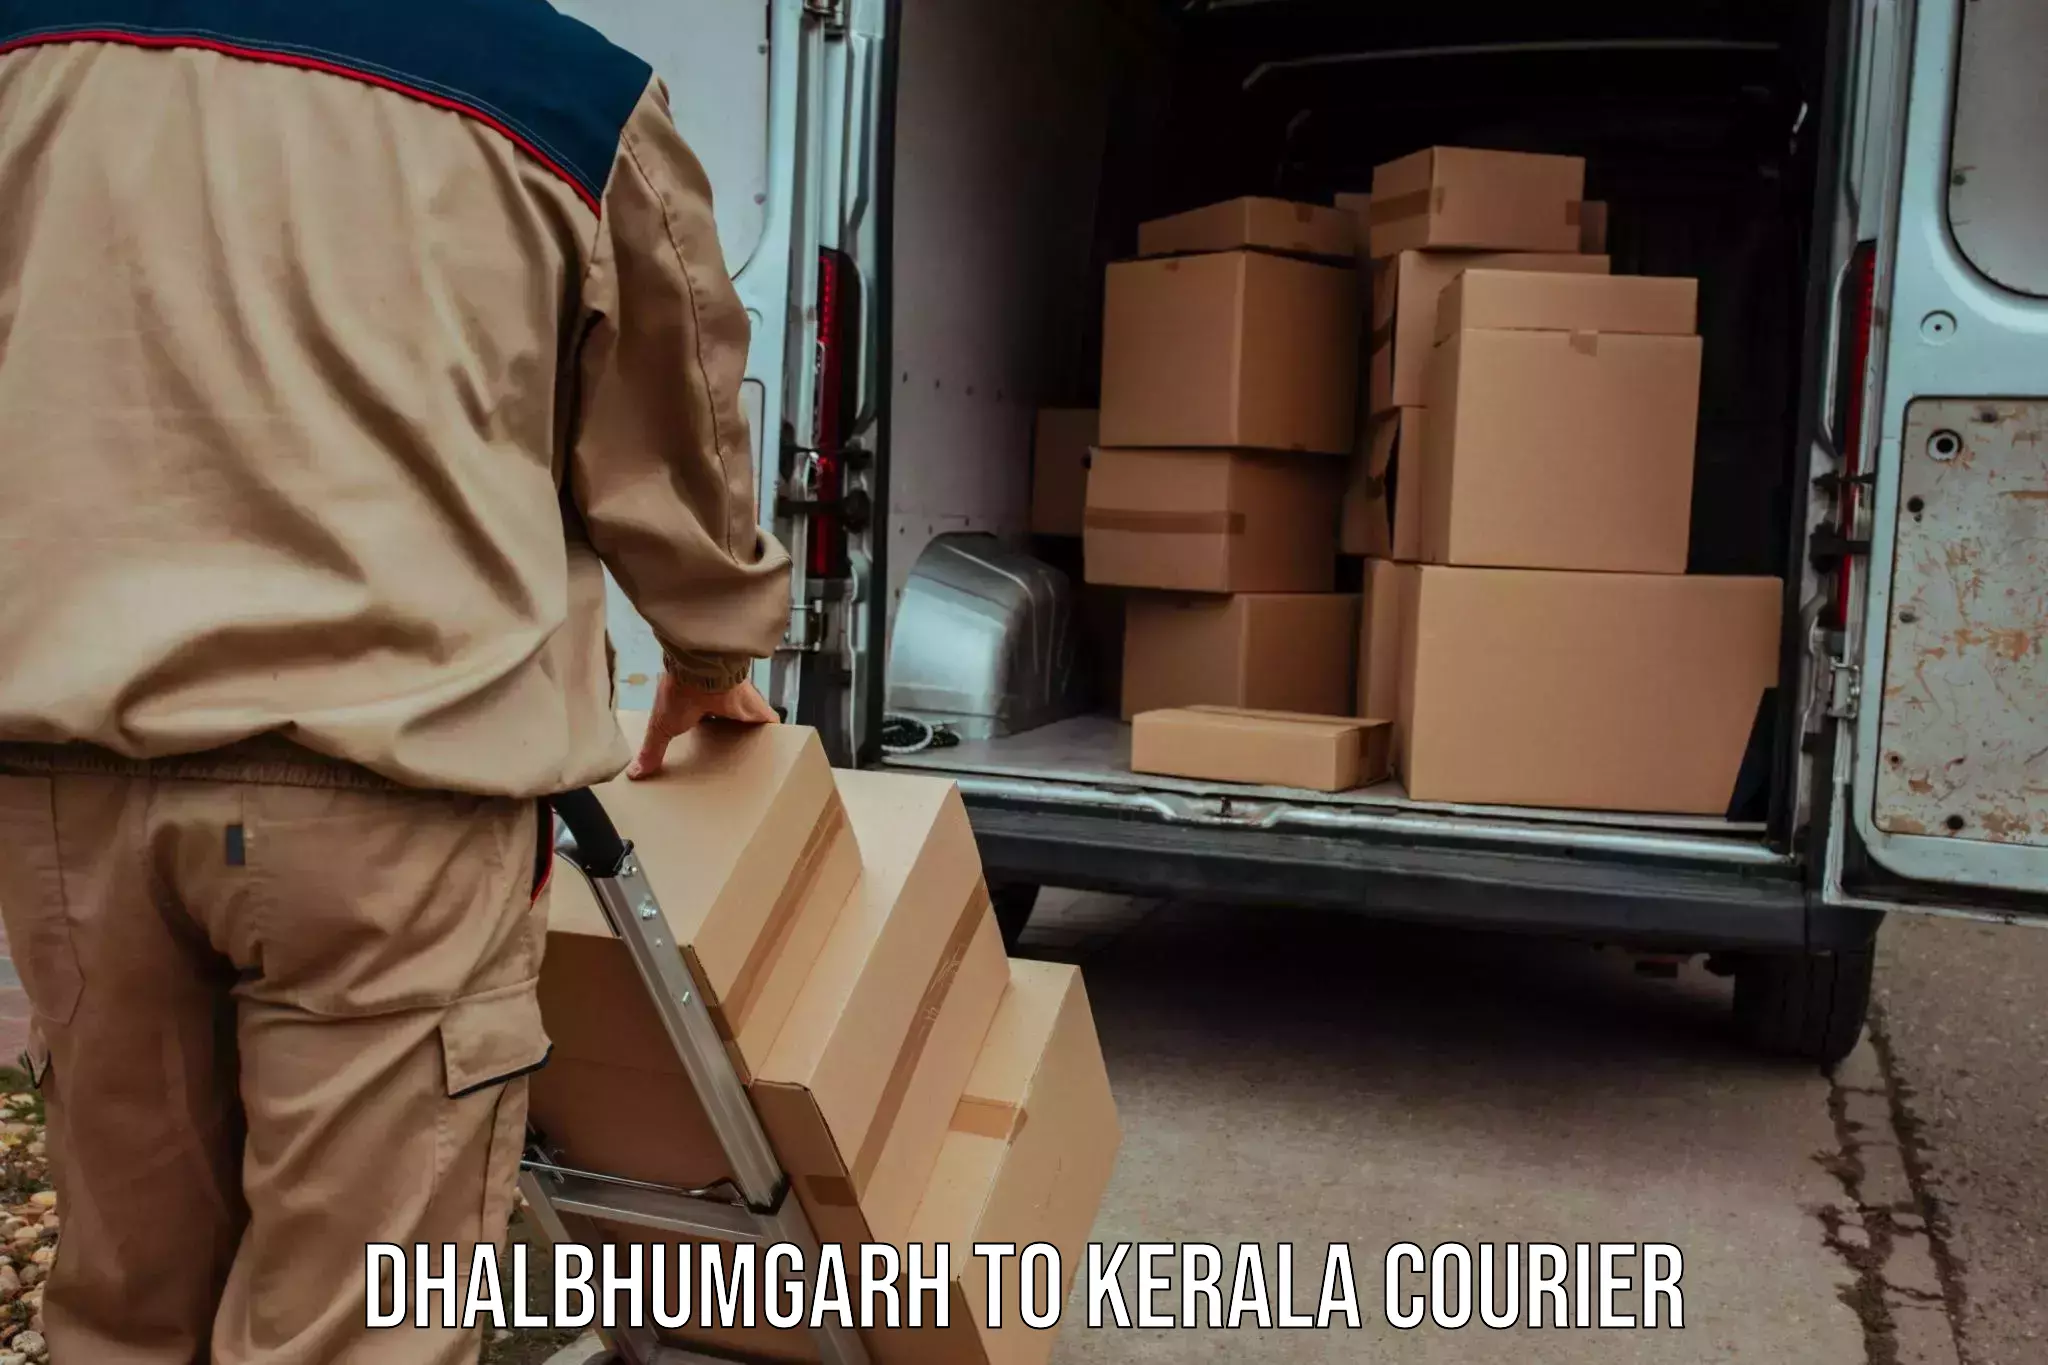 State-of-the-art courier technology Dhalbhumgarh to Palakkad